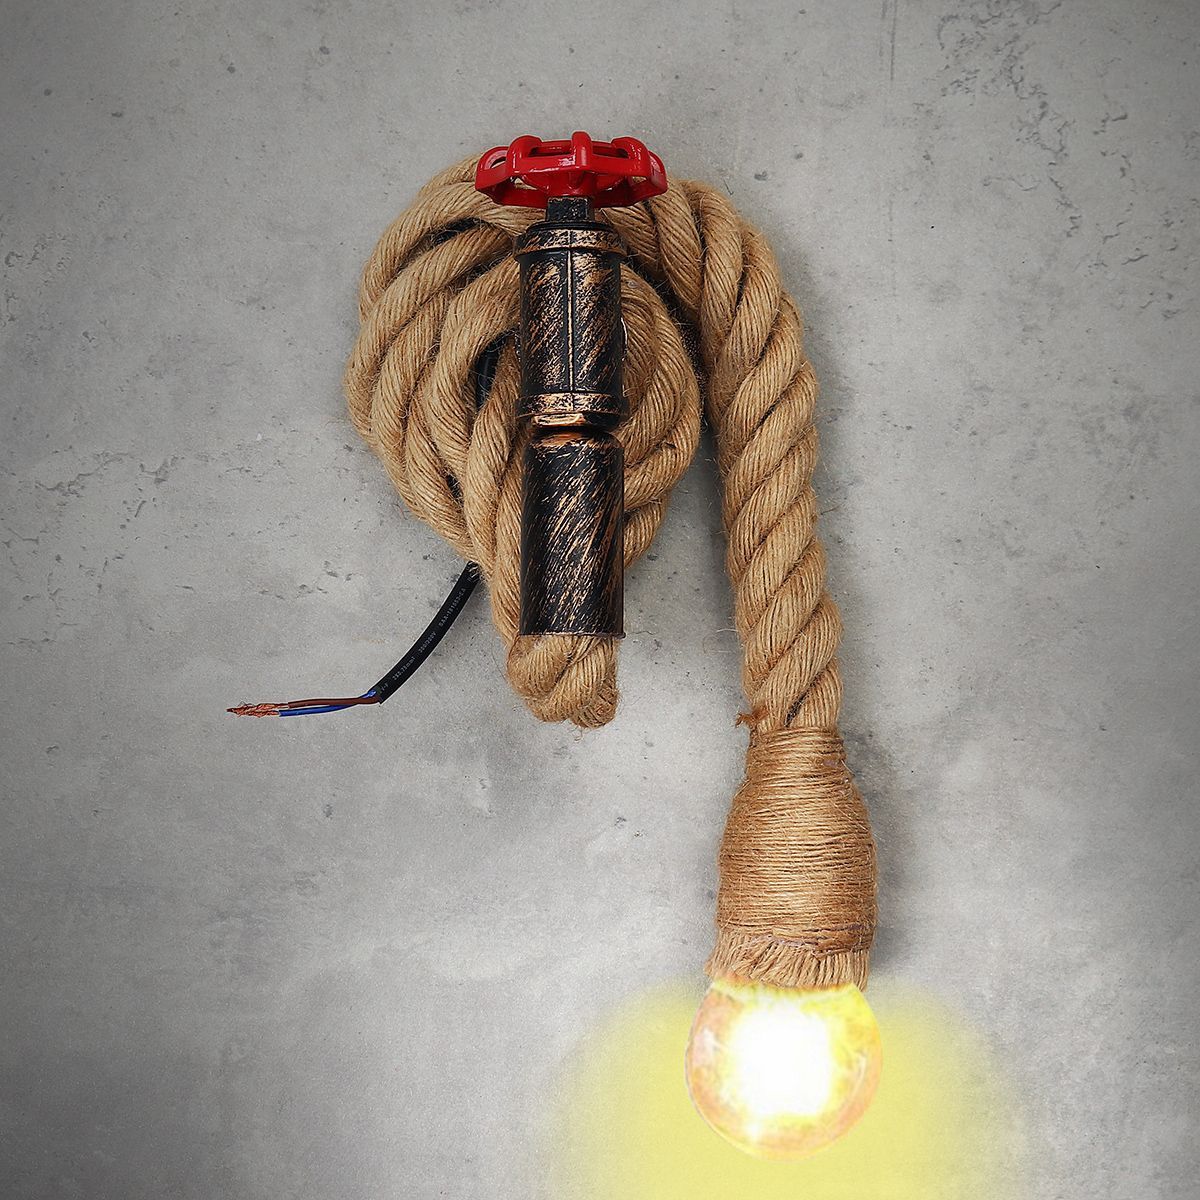 E27-Vintage-Industrial-Hemp-Rope-Pipe-Wall-Light-Lamp-Sconce-Fixture-Room-Decor-1646378